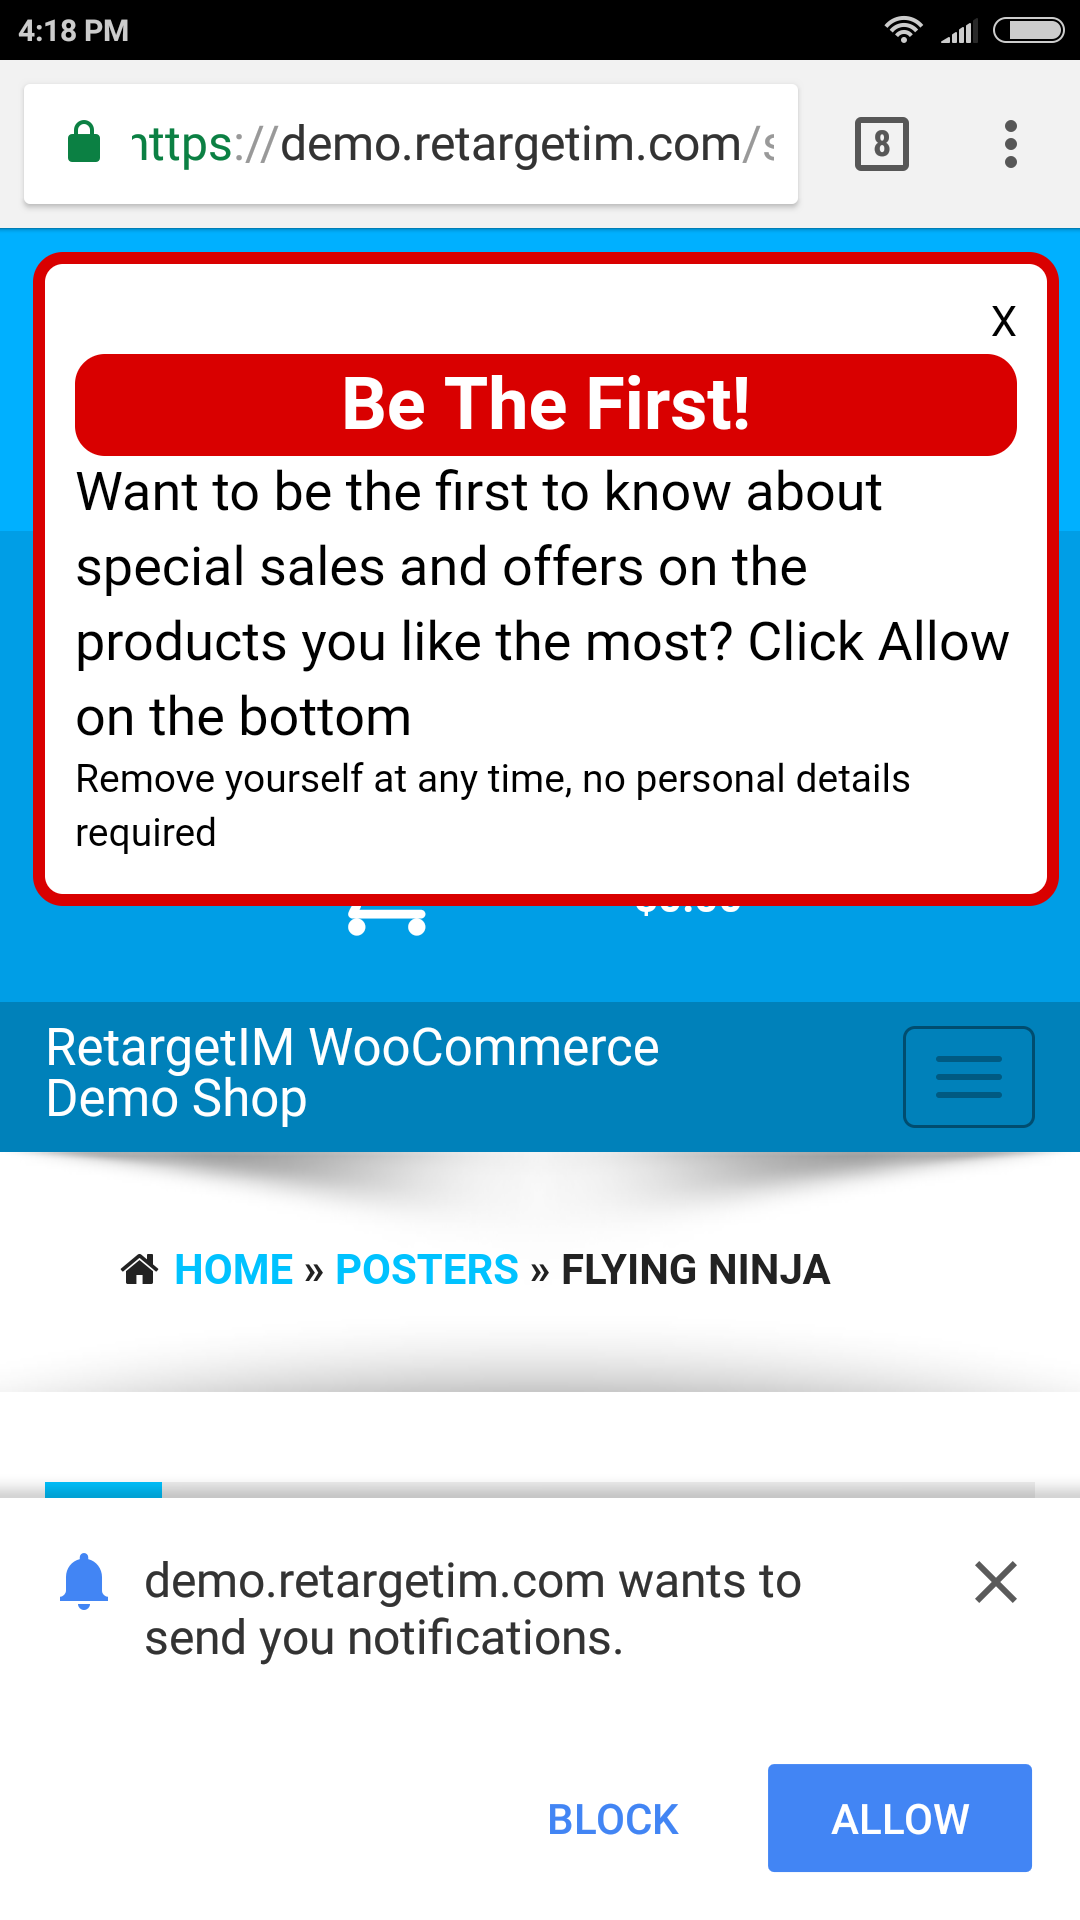 Example of the opt-in message with the "Approve" window in android